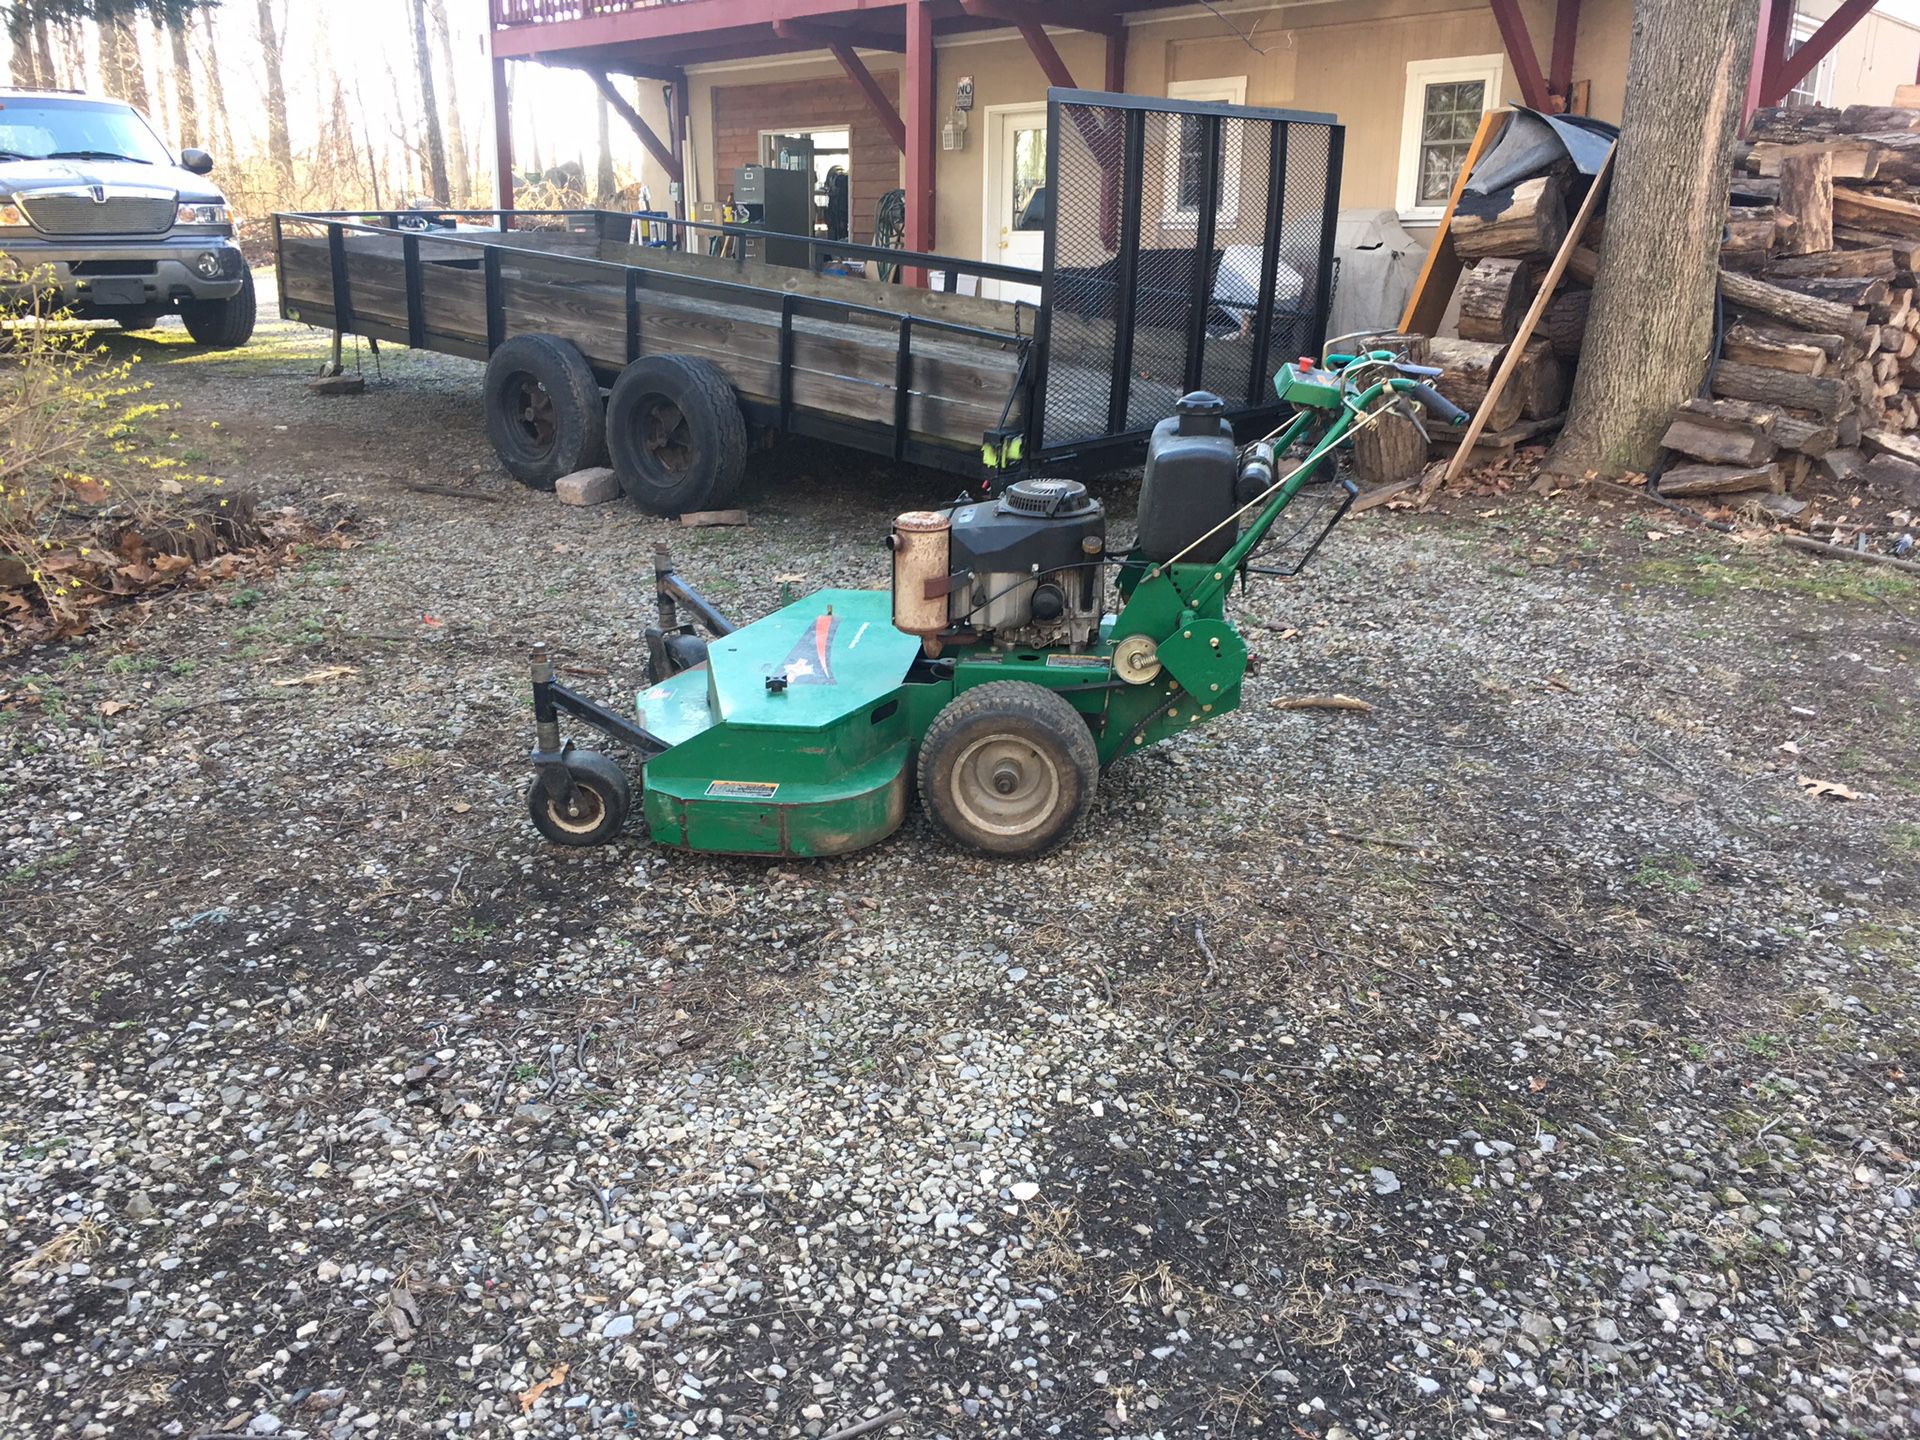 Trailer and lawnmower